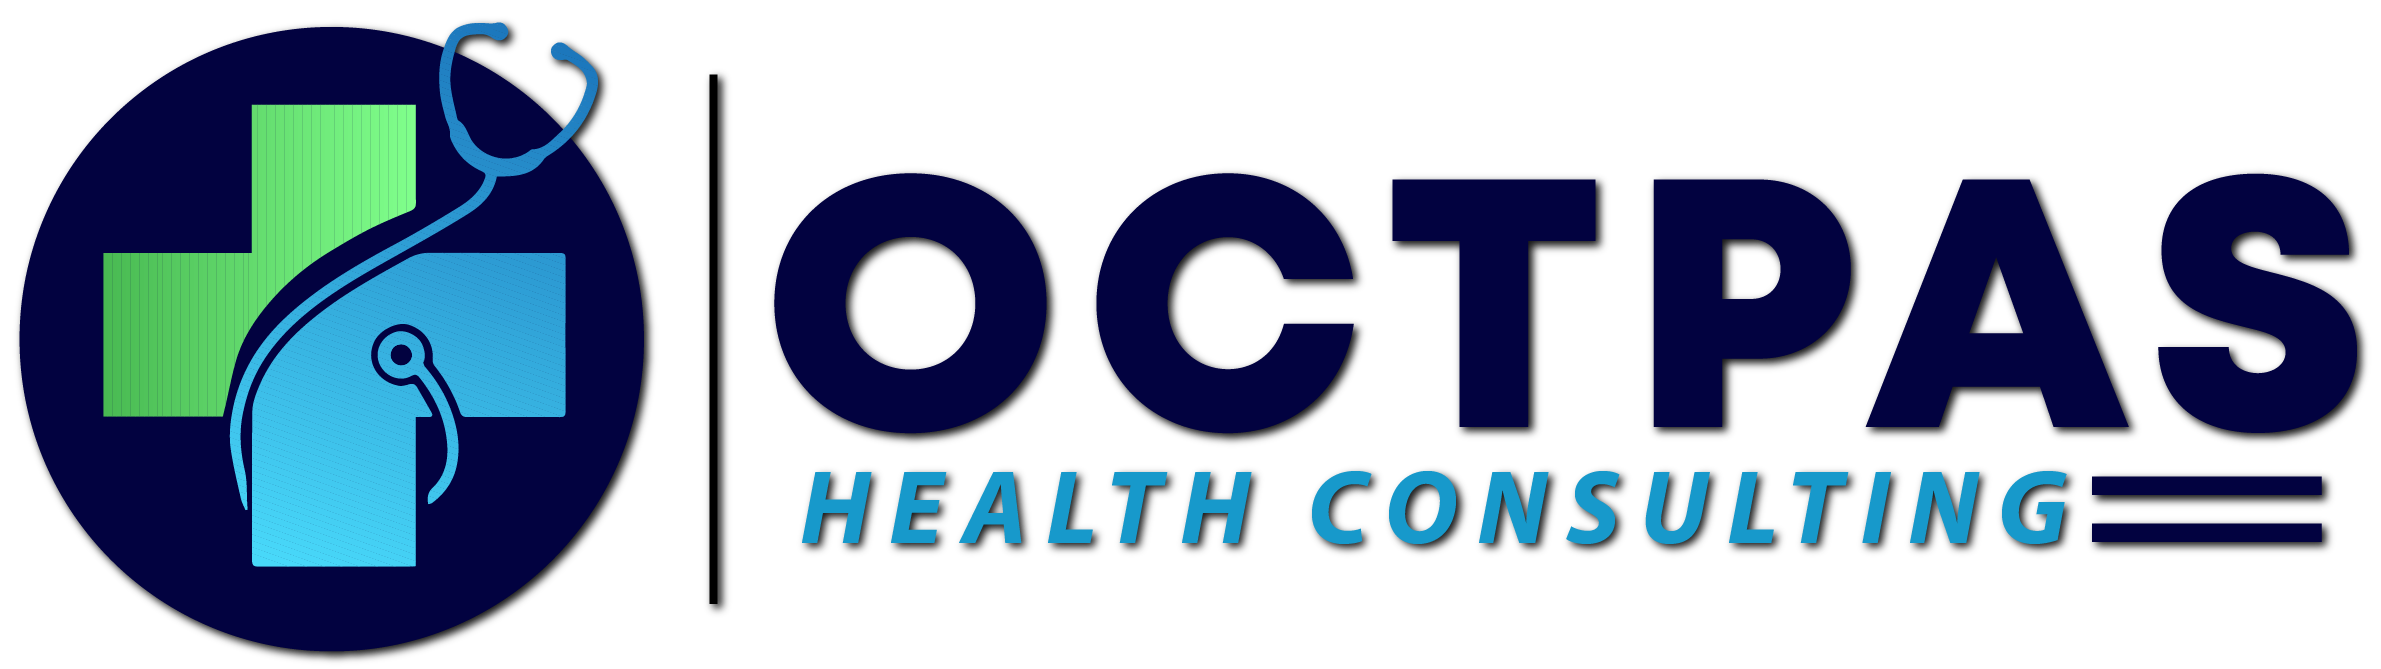 Octpas Health Consulting